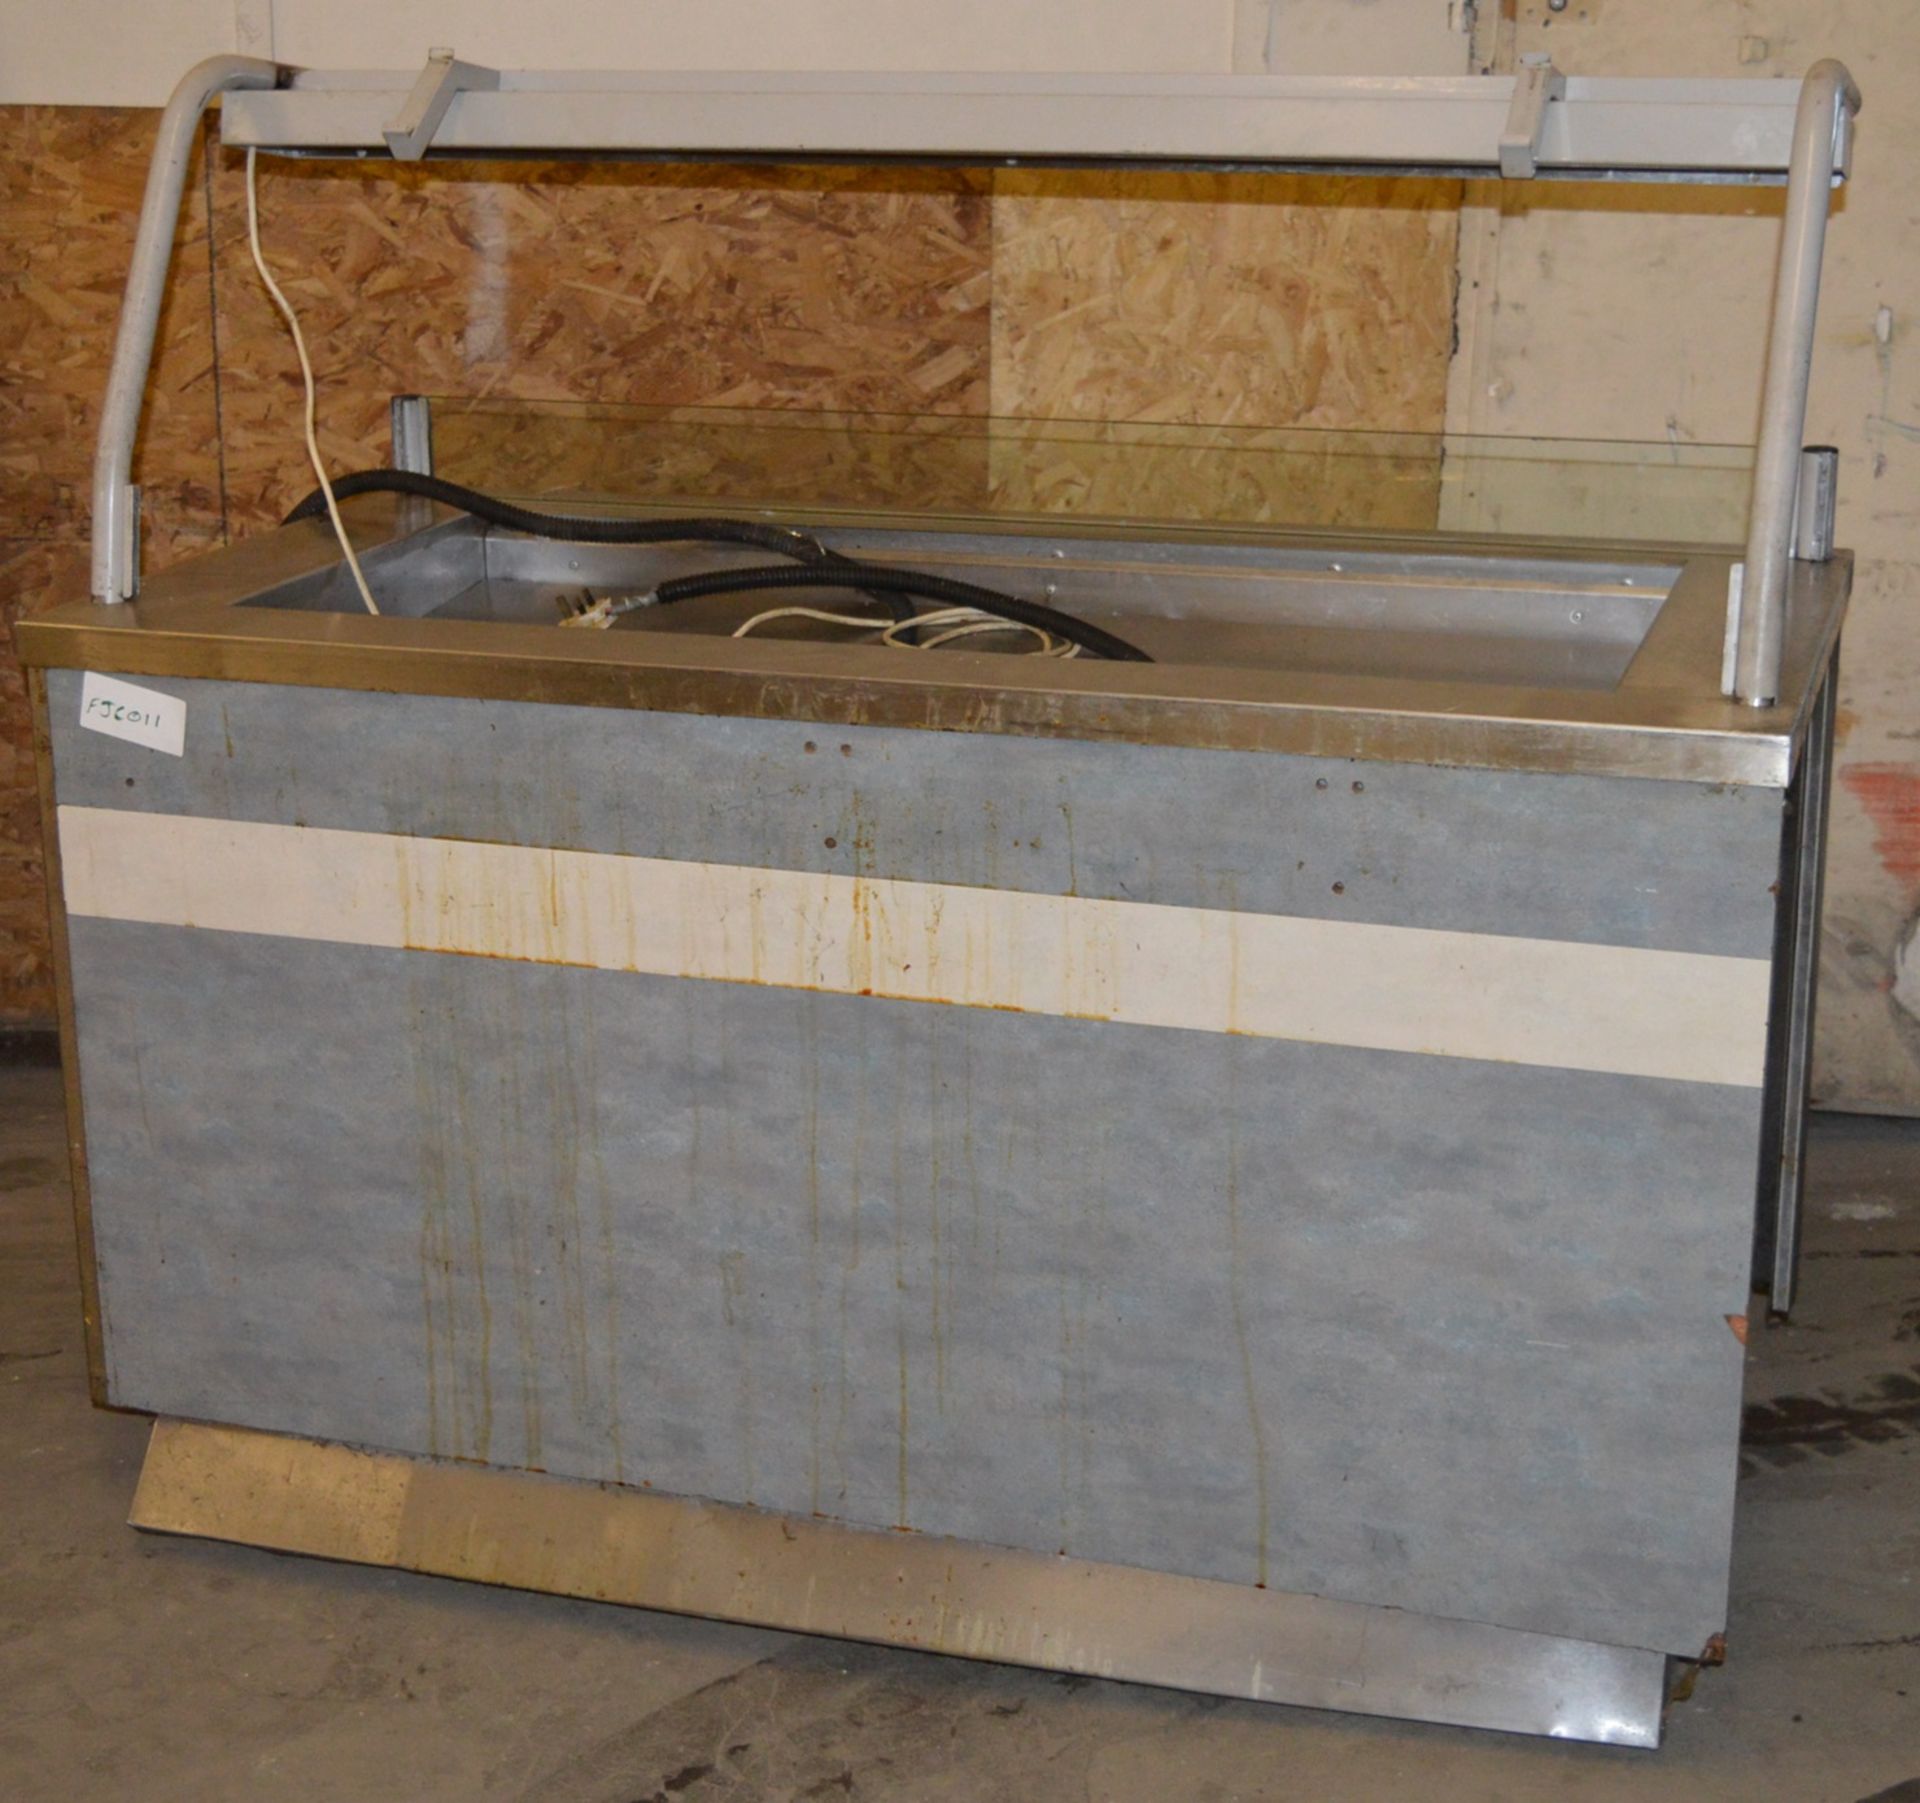 1 x Advanced Catering Equipment 1500BADW 240V Chilled Counter - Details to follow - Ref: FJC011 - - Image 10 of 10